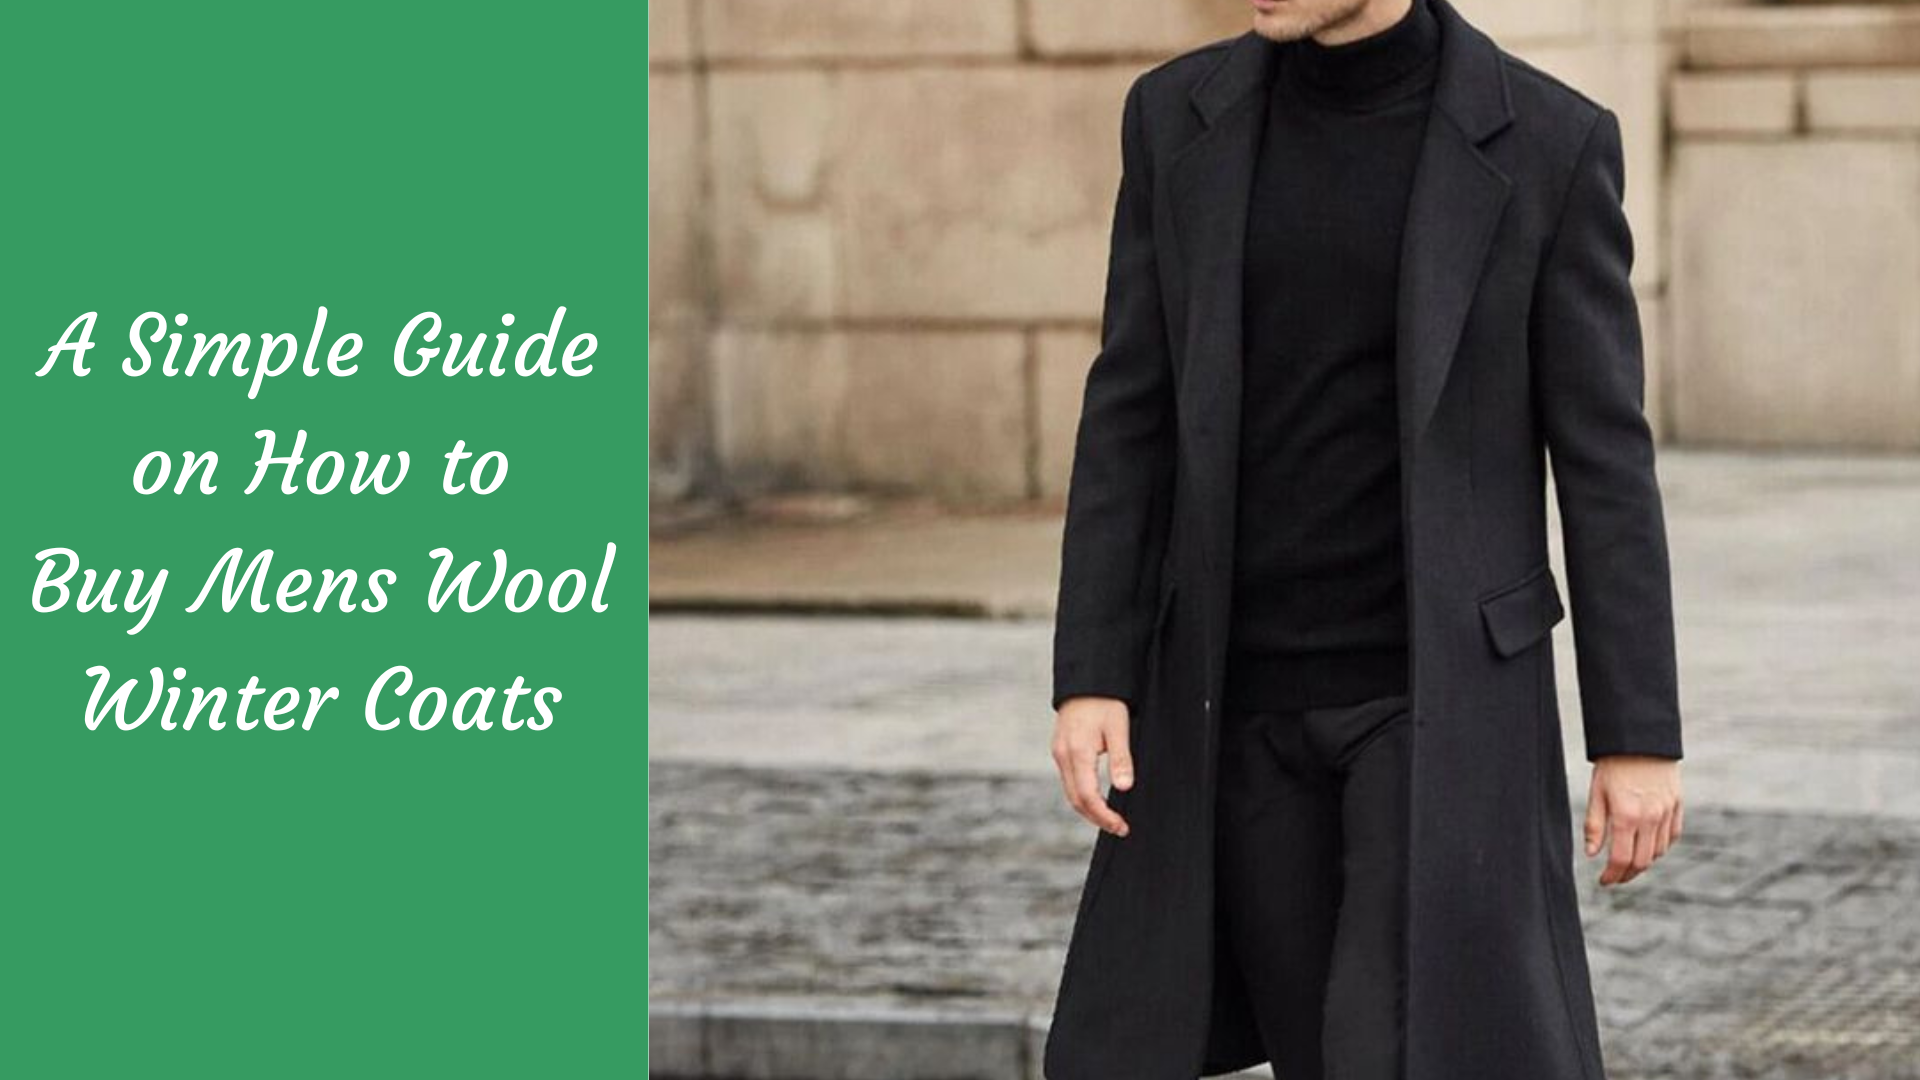 A Simple Guide on How to Buy Mens Wool Winter Coats - The Kosha Journal